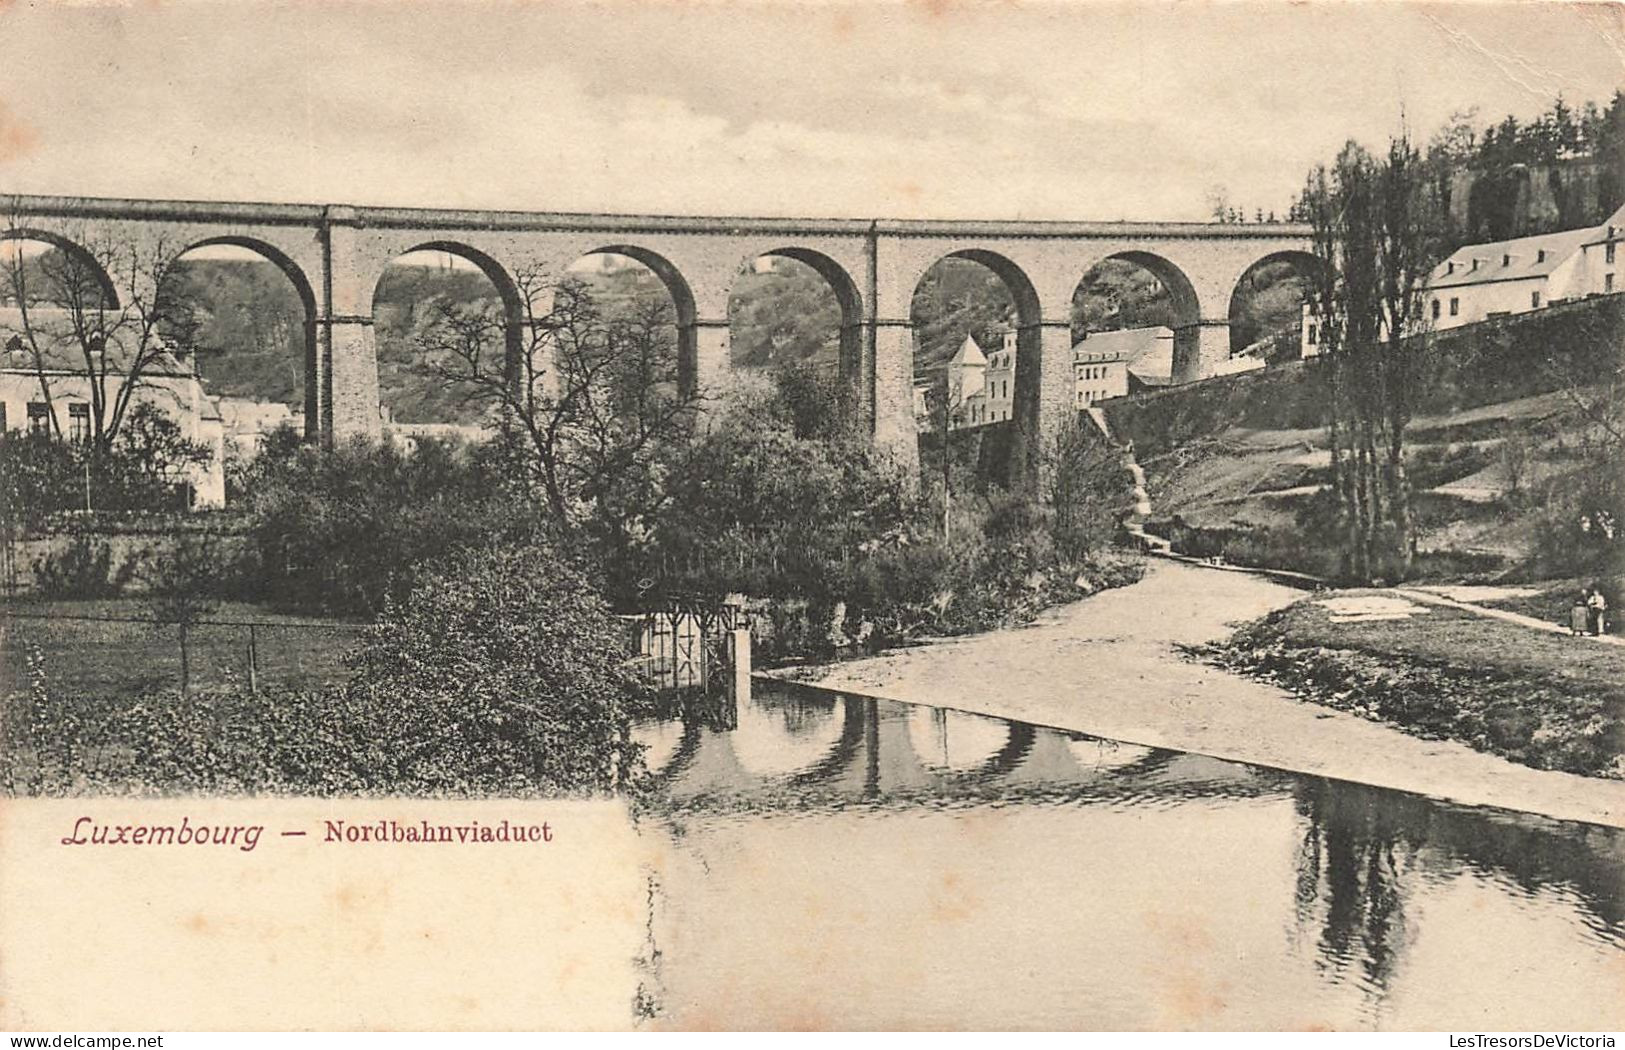 LUXEMBOURG - Nordbahnviaduct - Carte Postale Ancienne - Luxembourg - Ville